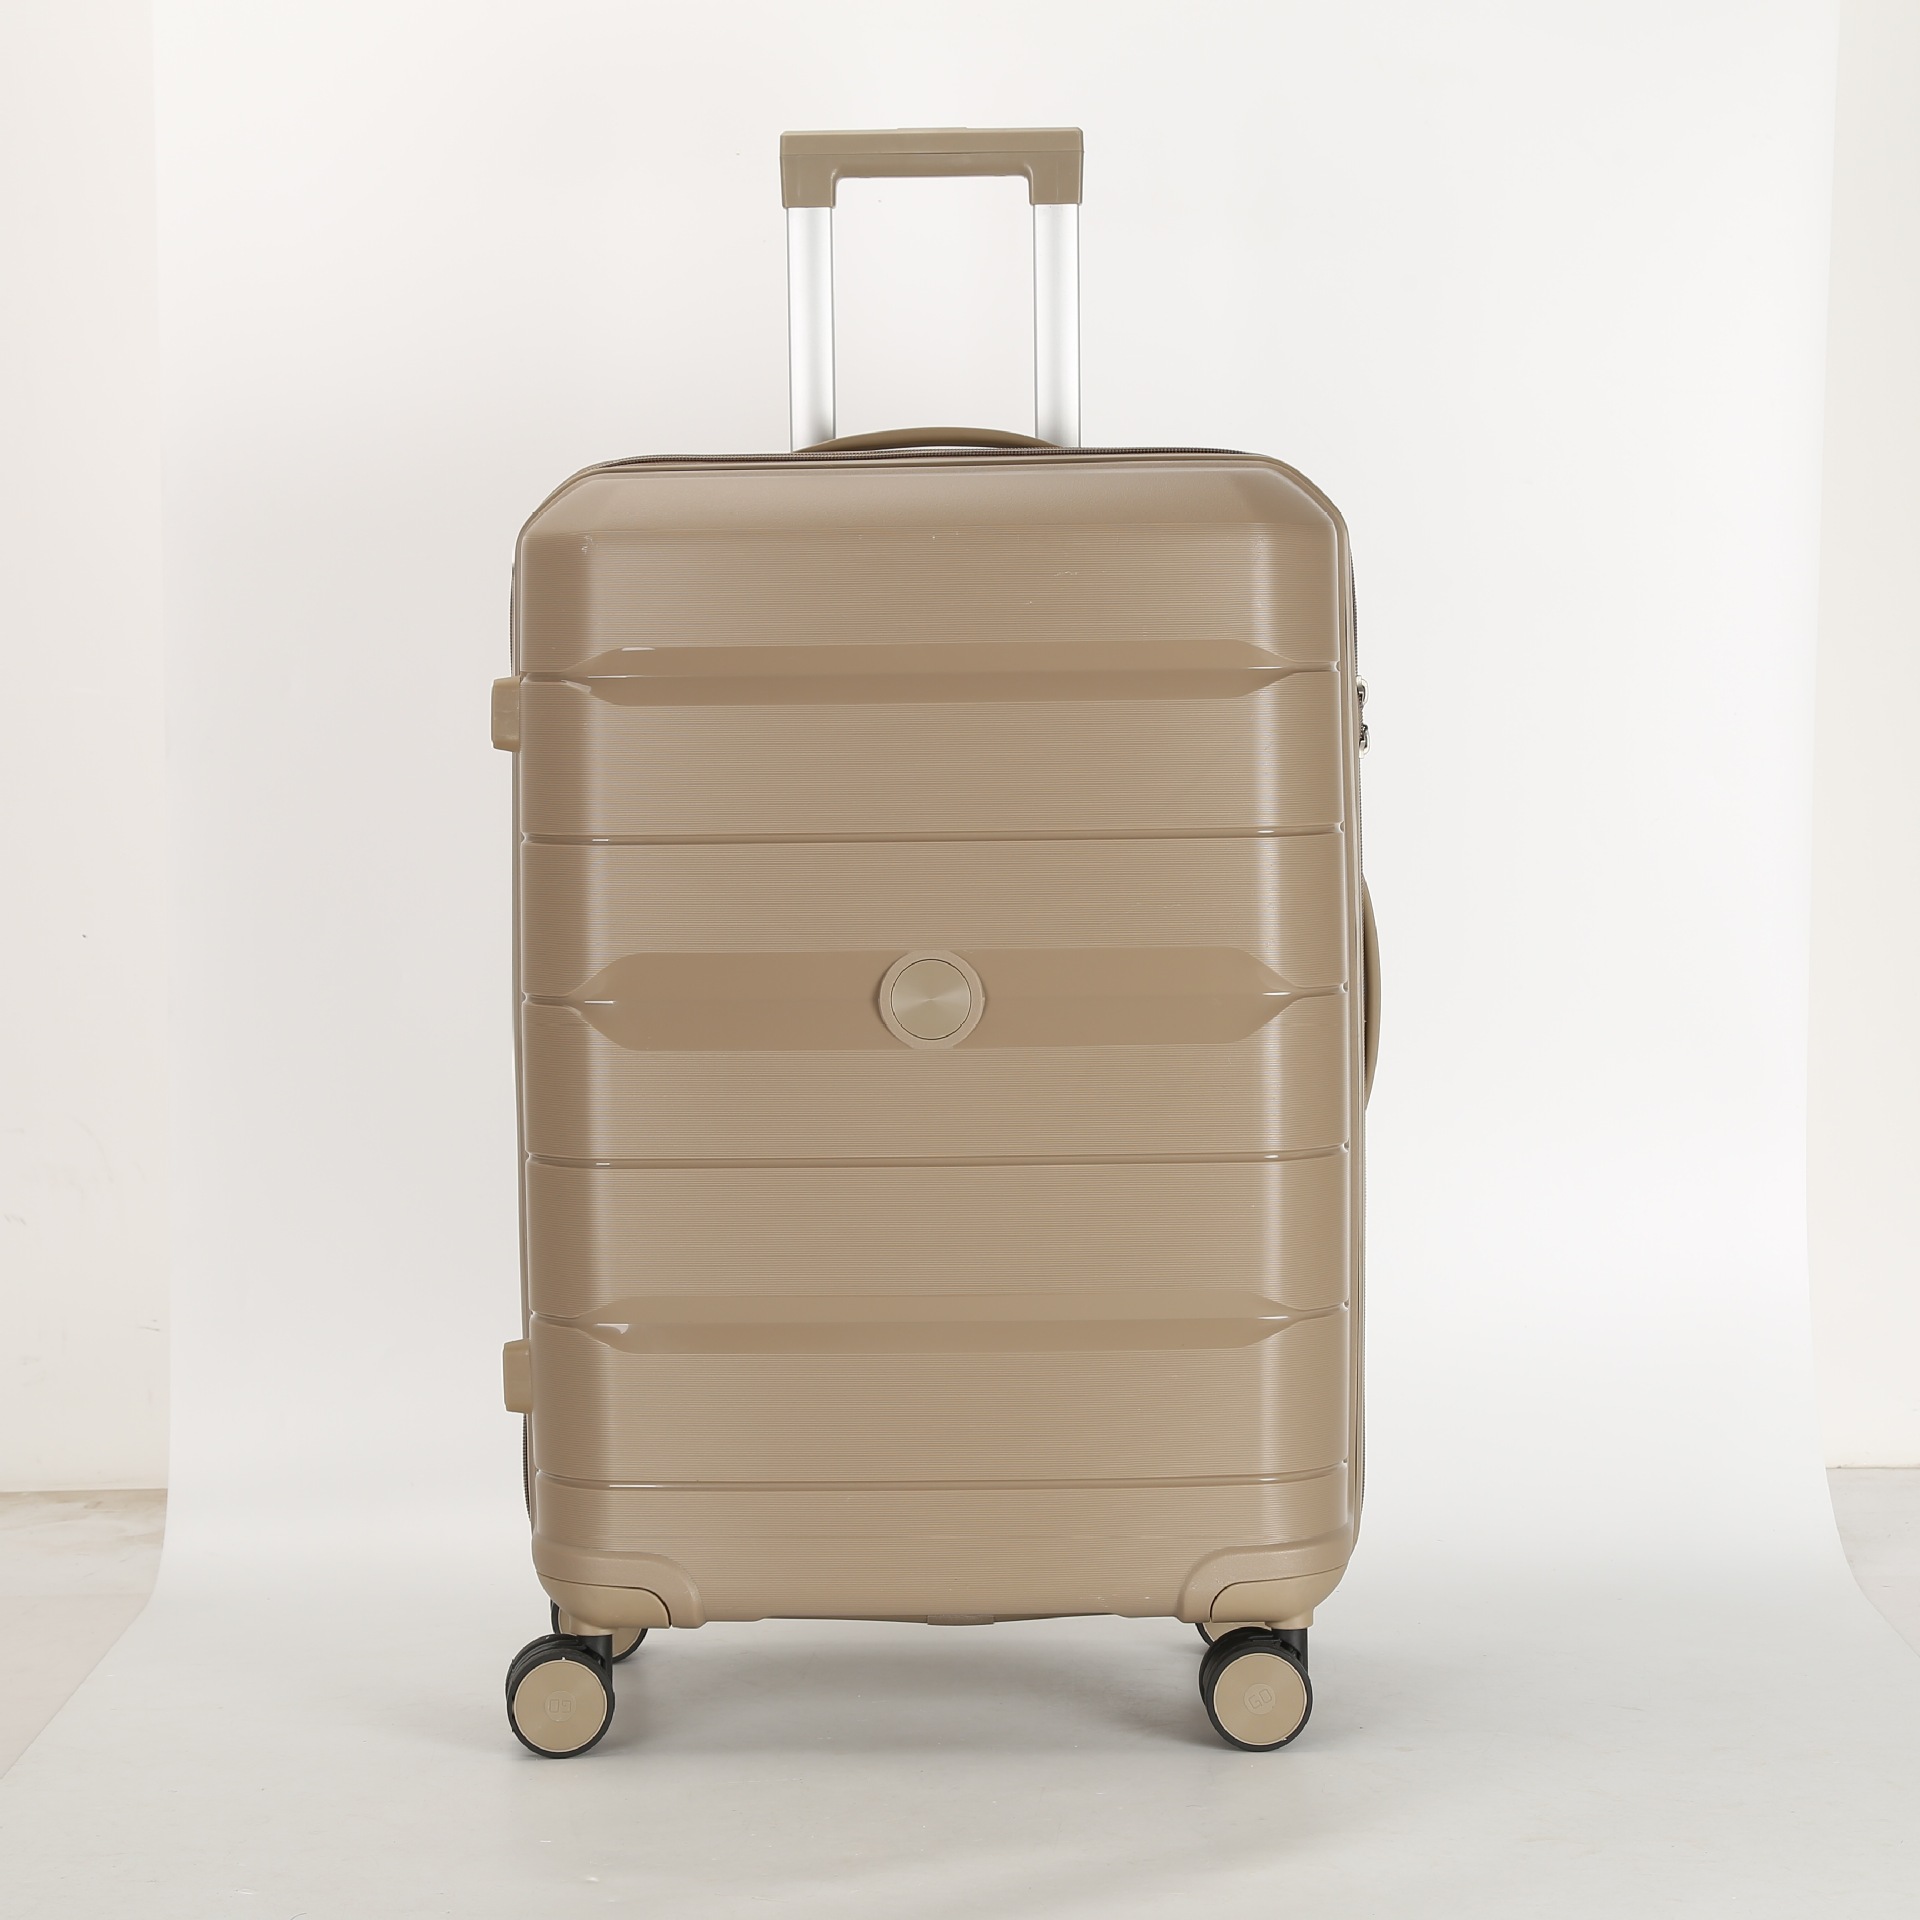 Pp Luggage and Suitcase Trolley Case Export Suit Luggage Three-Piece Luggage Set Source Factory Wholesale Suitcase